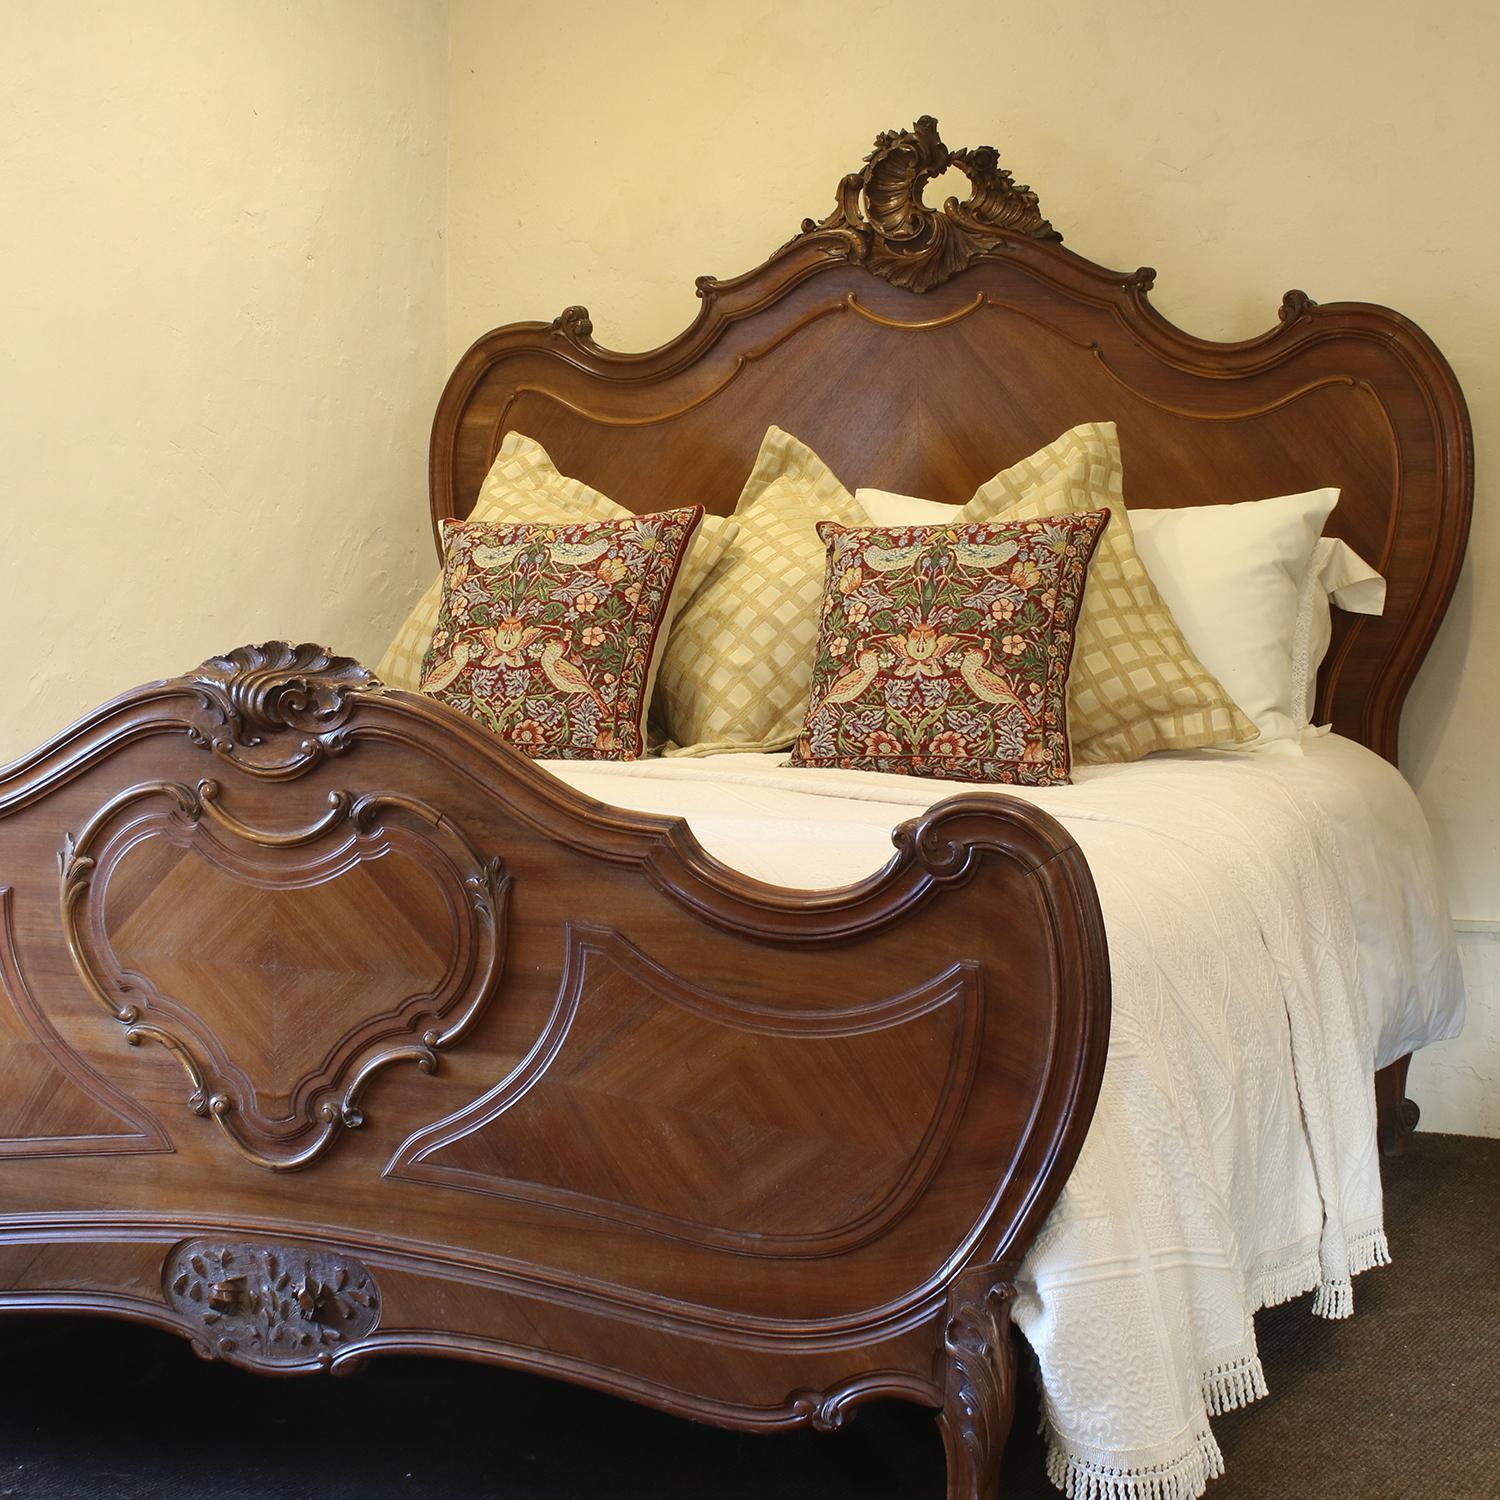 A fine Louis XV style walnut bed with carving on pediment and foot panel.

This bed accepts a British king size or American queen size, 5ft wide (60 inches or 150cm) base and mattress set.

The price is for the bed and a firm bed base to support a